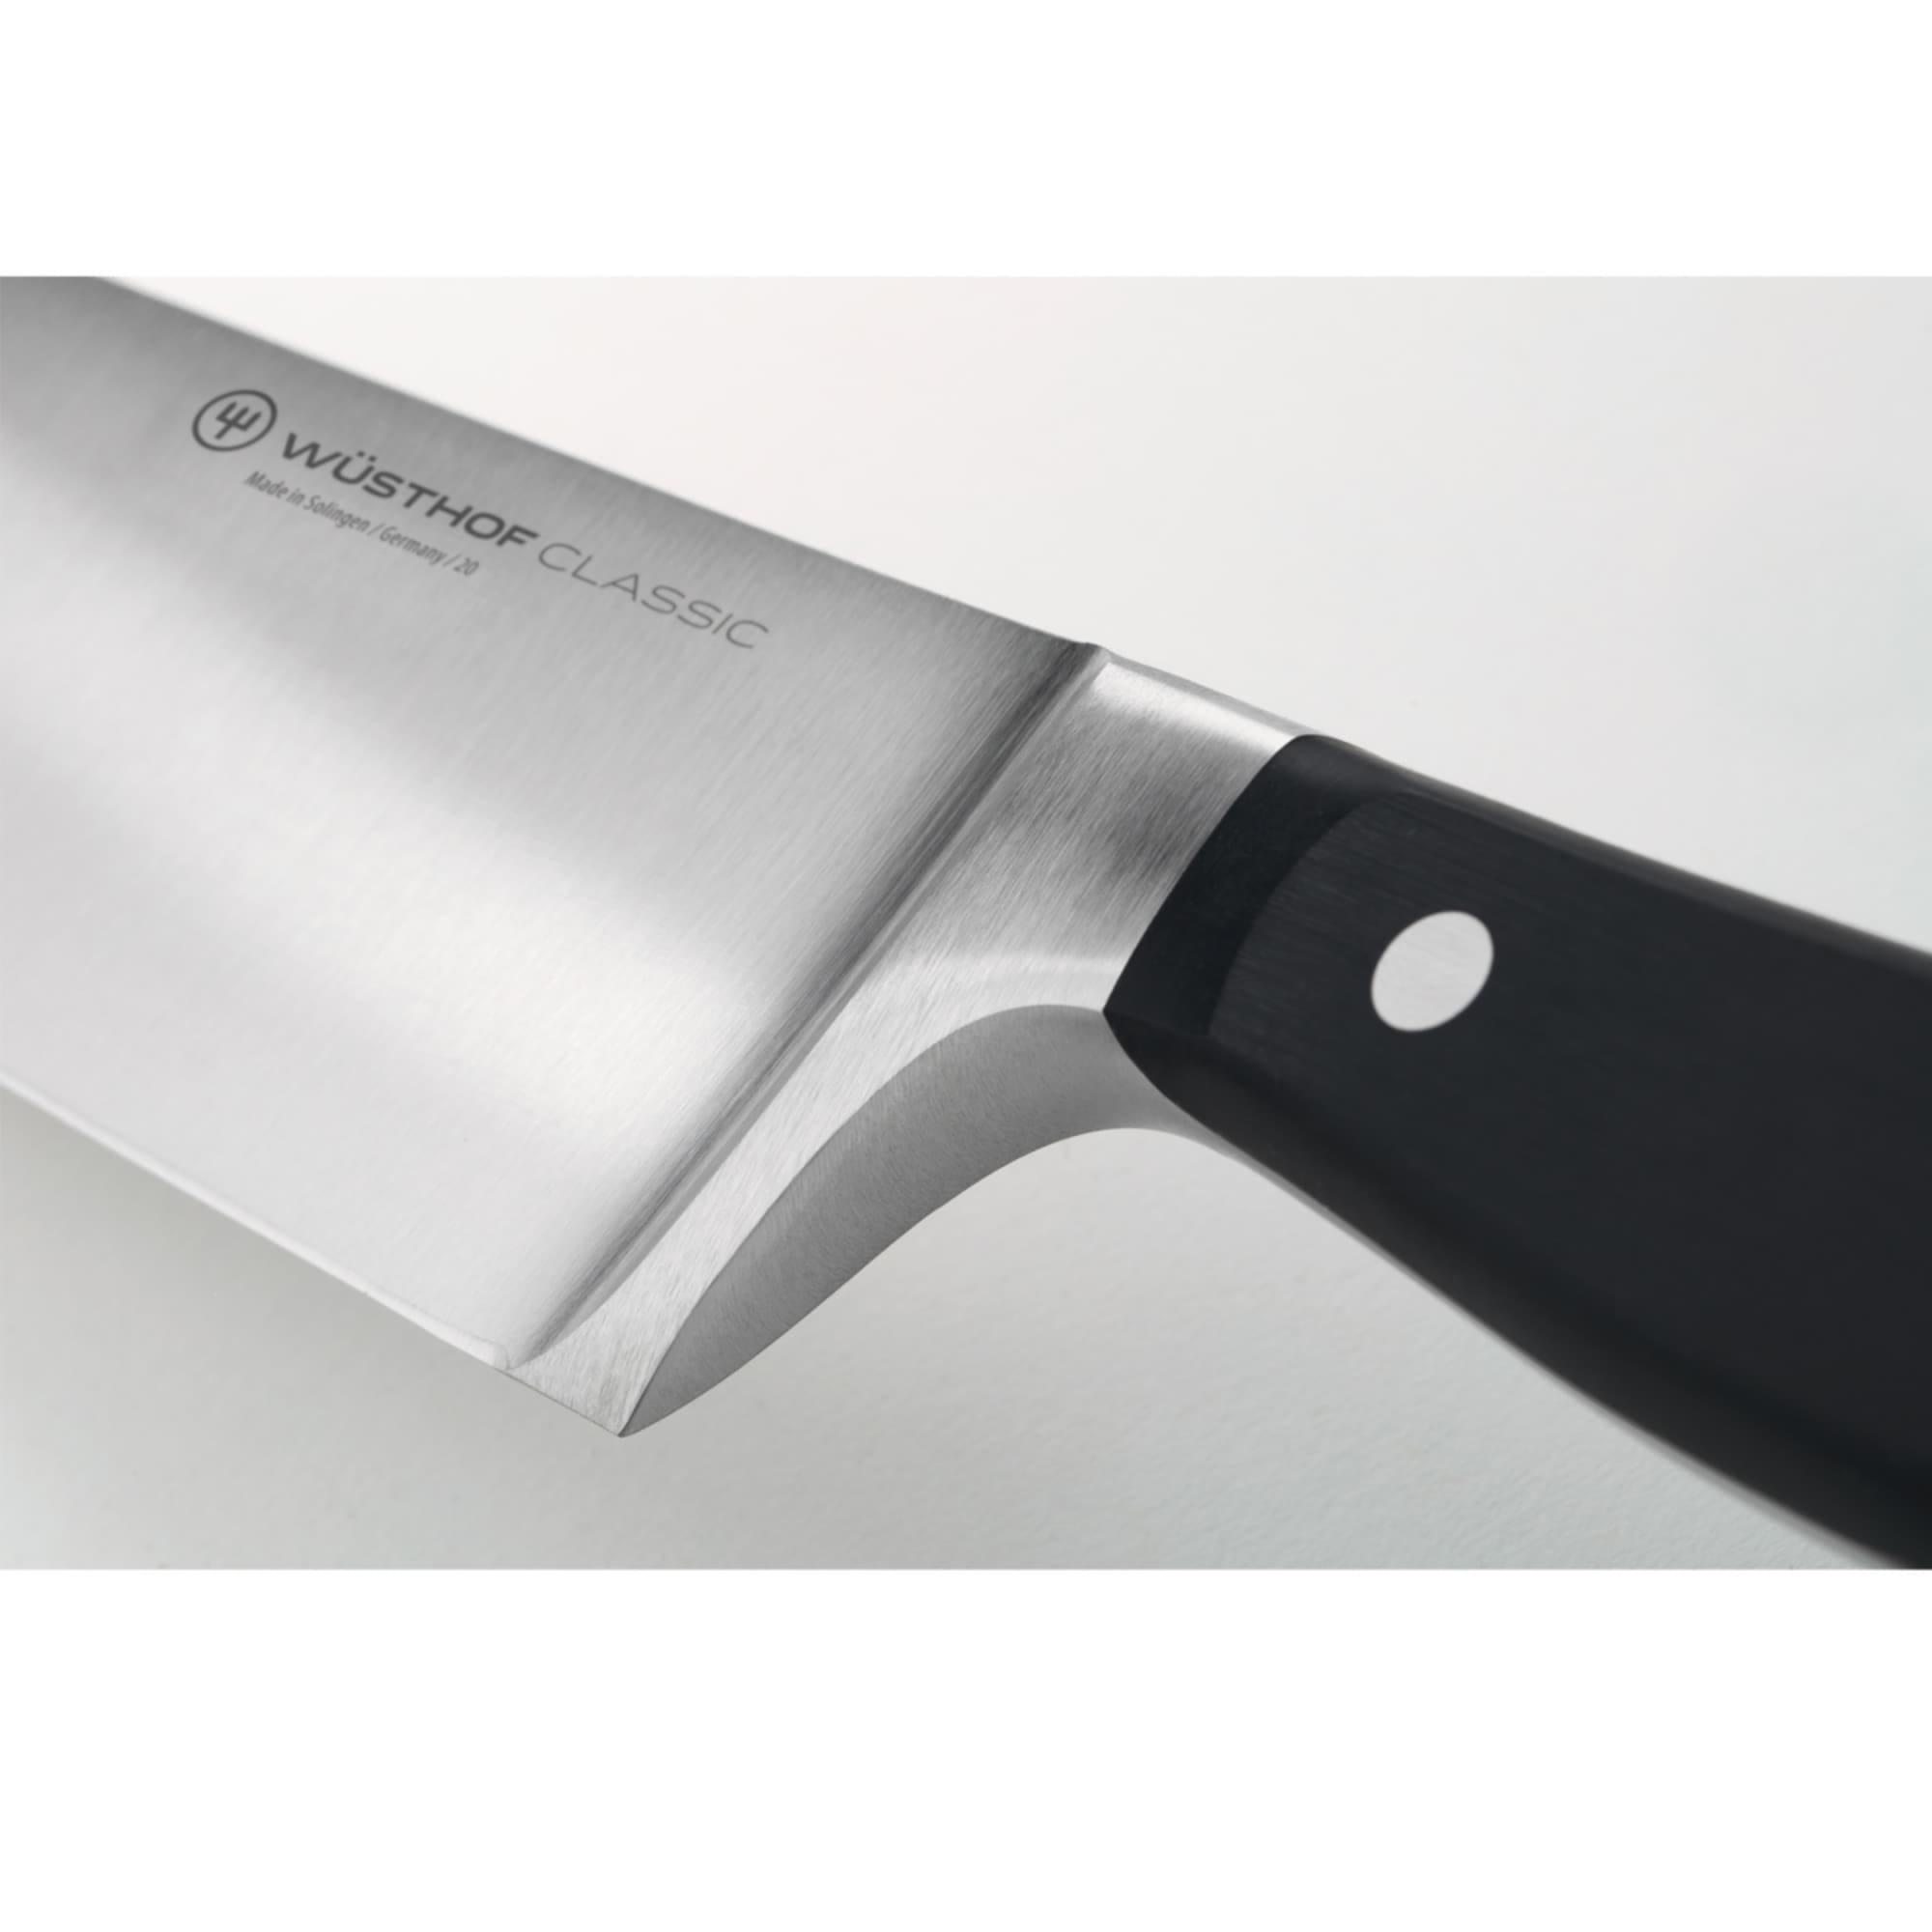 Wusthof Classic Cook's Knife 23cm Image 4